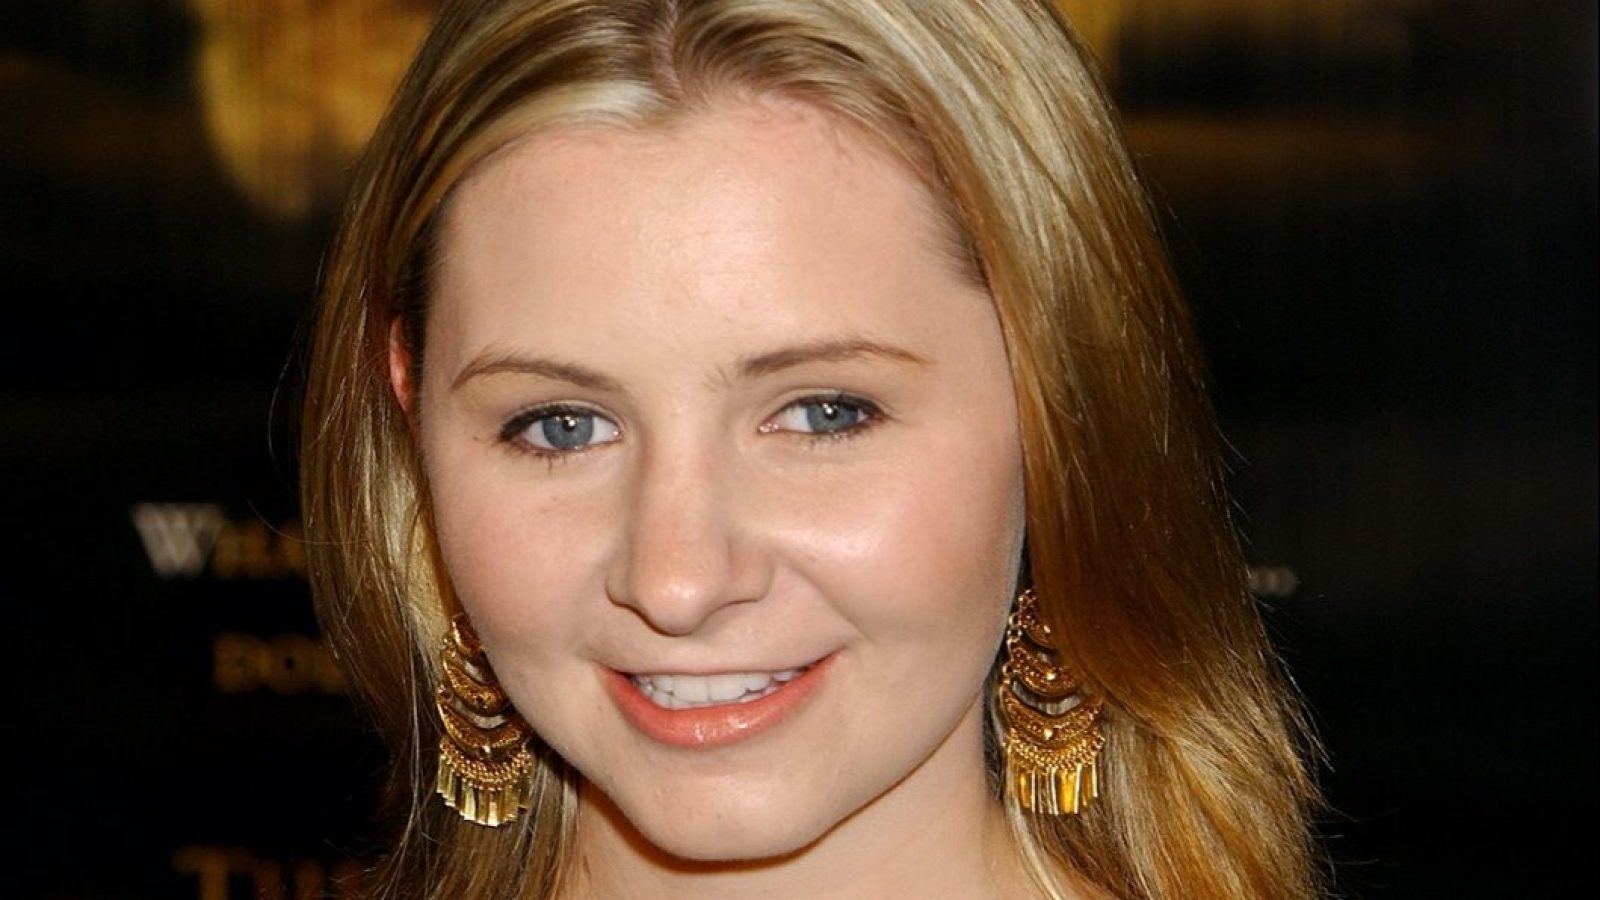 She Played Lucy On 7th Heaven See Beverley Mitchell Now At 41